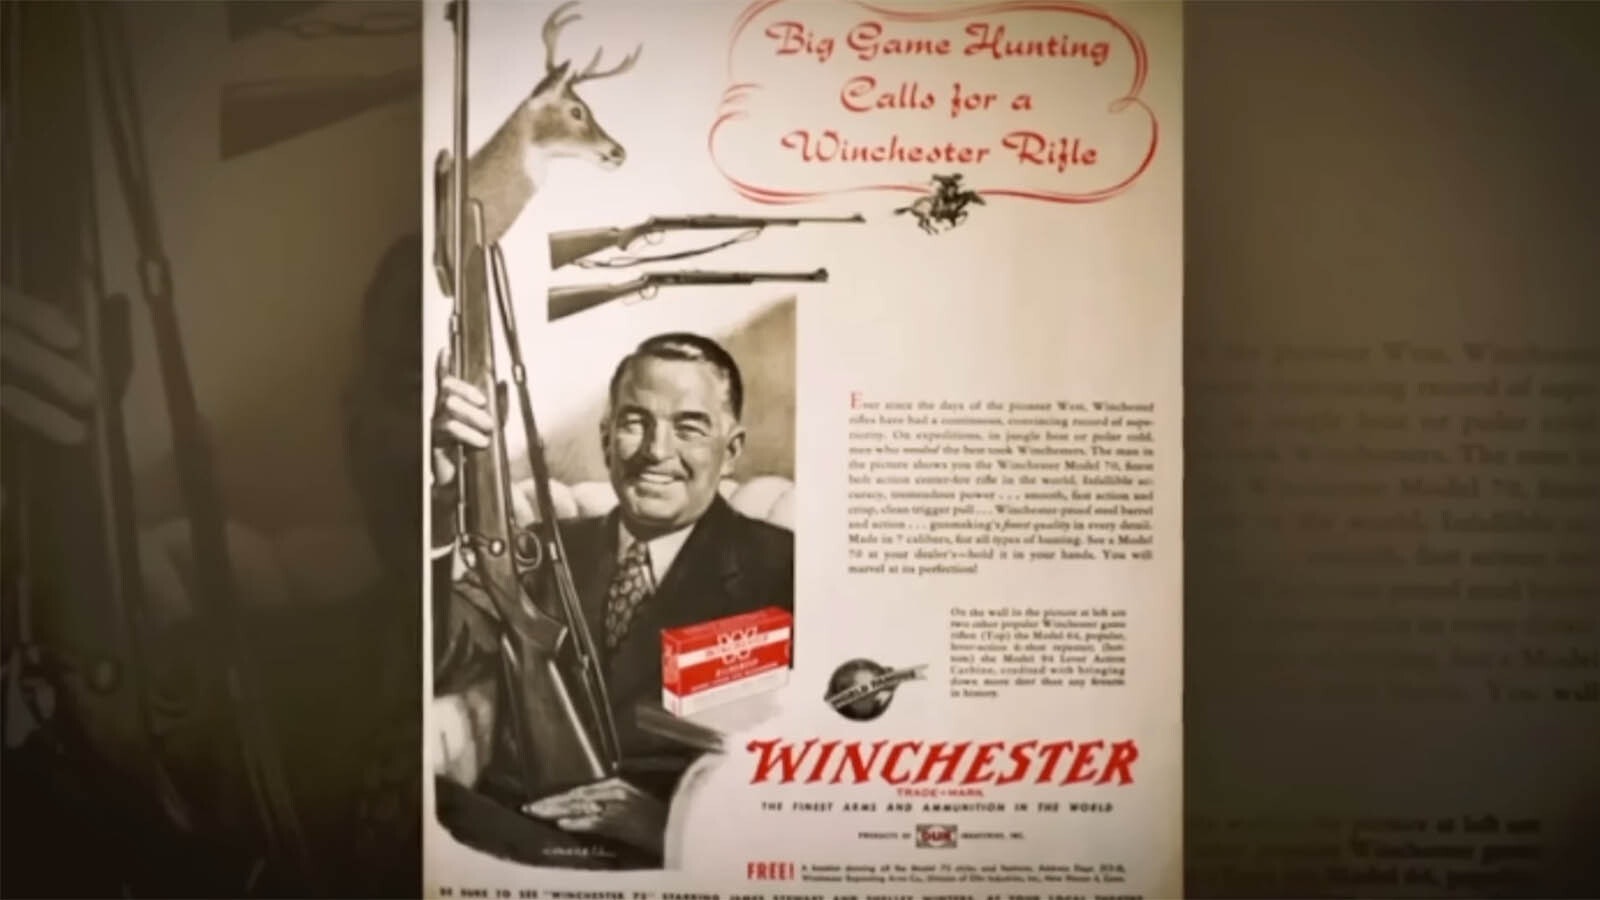 An advertisement for the Winchester 70 hunting rifle.